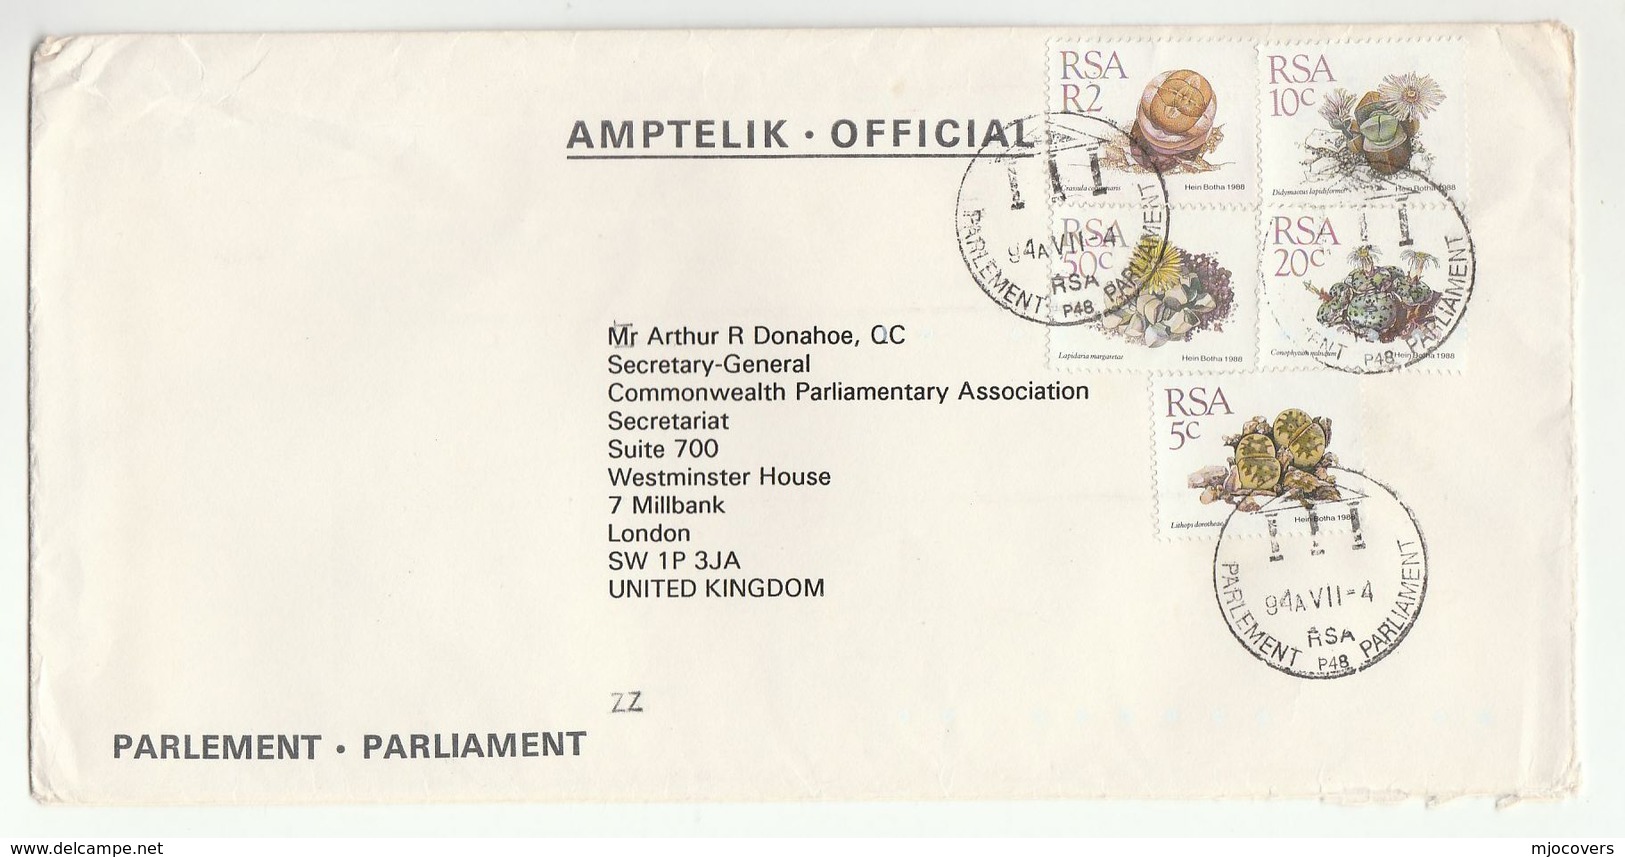 'PARLIAMENT' Pmk SOUTH AFRICA  Stamps OFFICIAL PARLIAMENT Cover To Commonwealth Parliamentary Association London GB - Covers & Documents